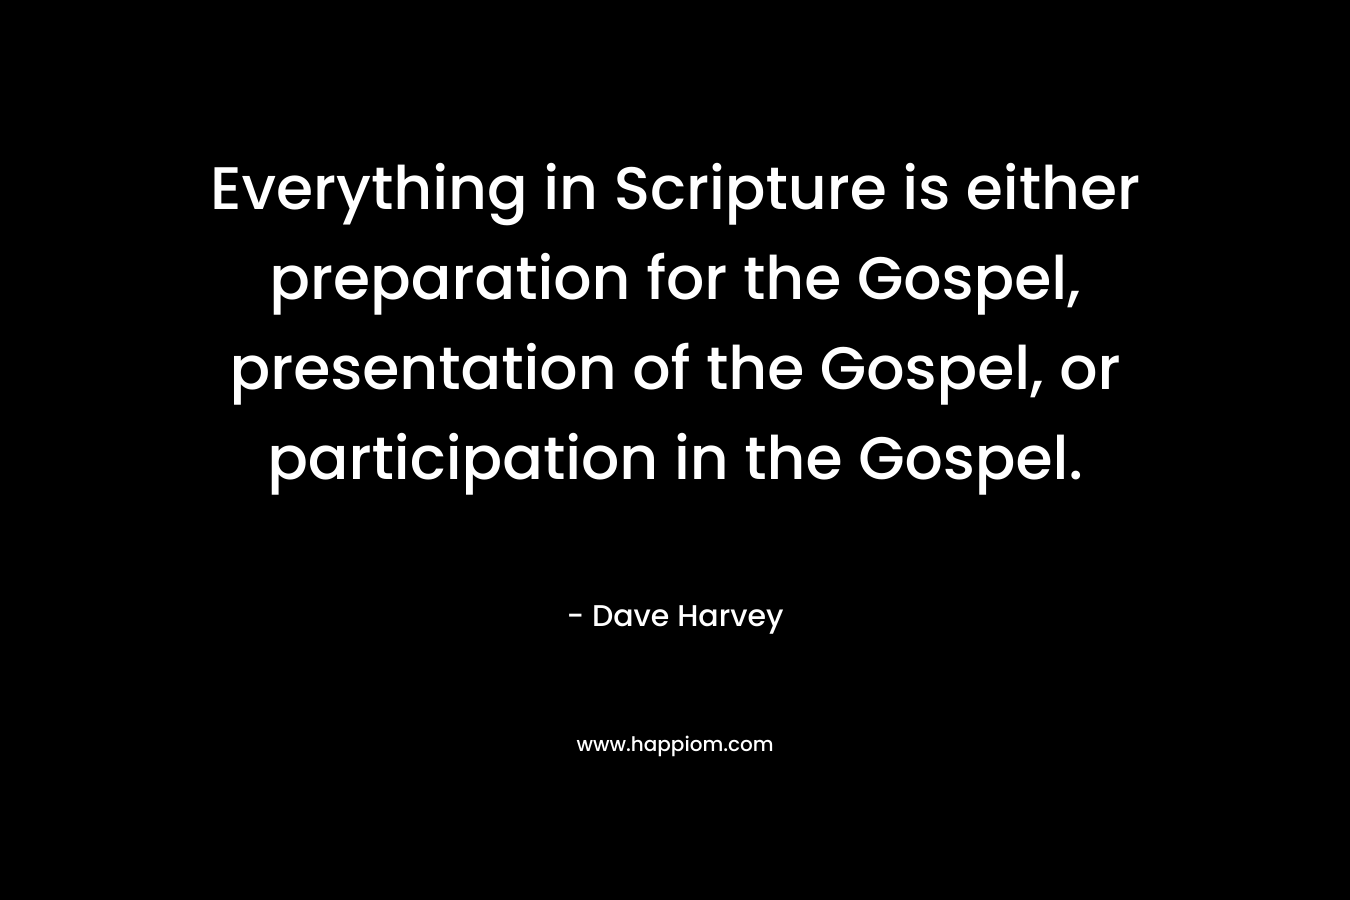 Everything in Scripture is either preparation for the Gospel, presentation of the Gospel, or participation in the Gospel.